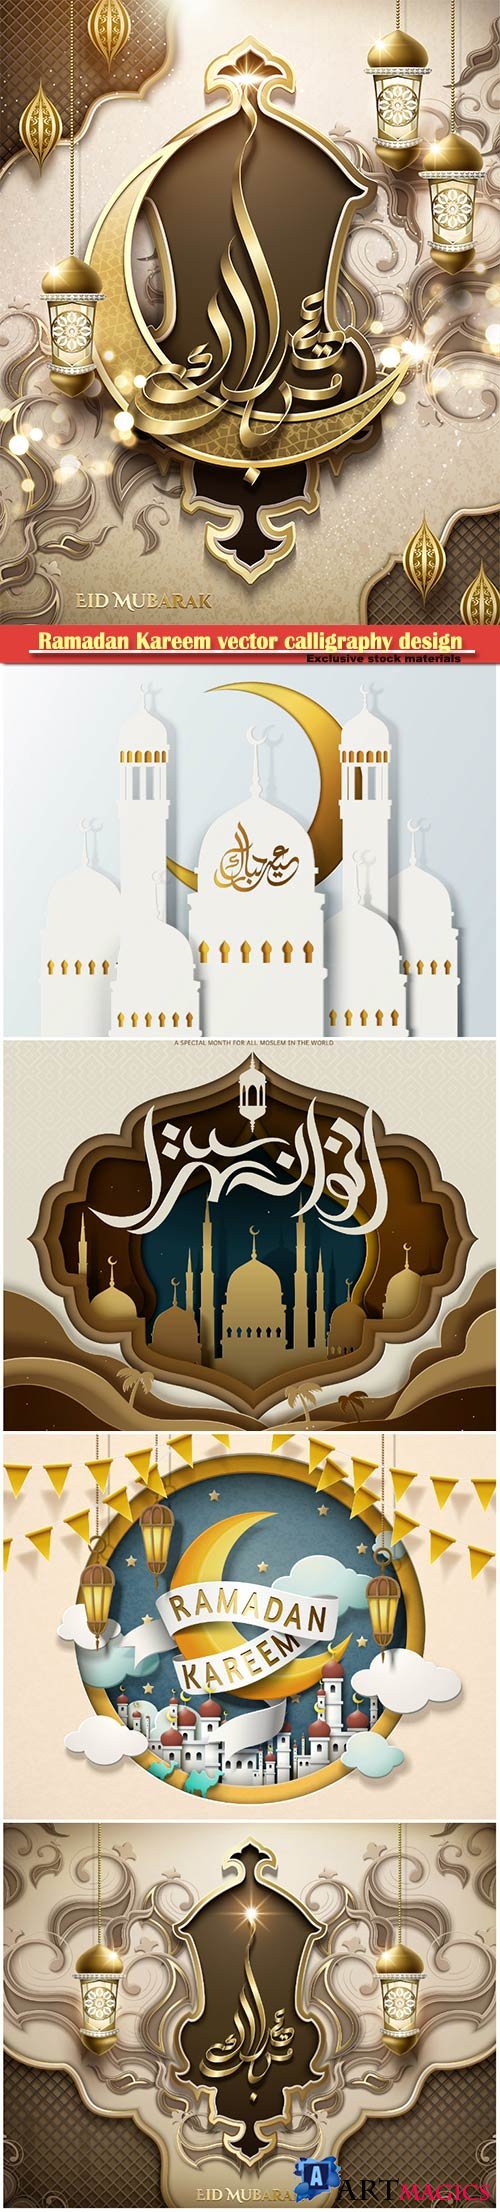 Ramadan Kareem vector calligraphy design with decorative floral pattern,mosque silhouette, crescent and glittering islamic background # 8